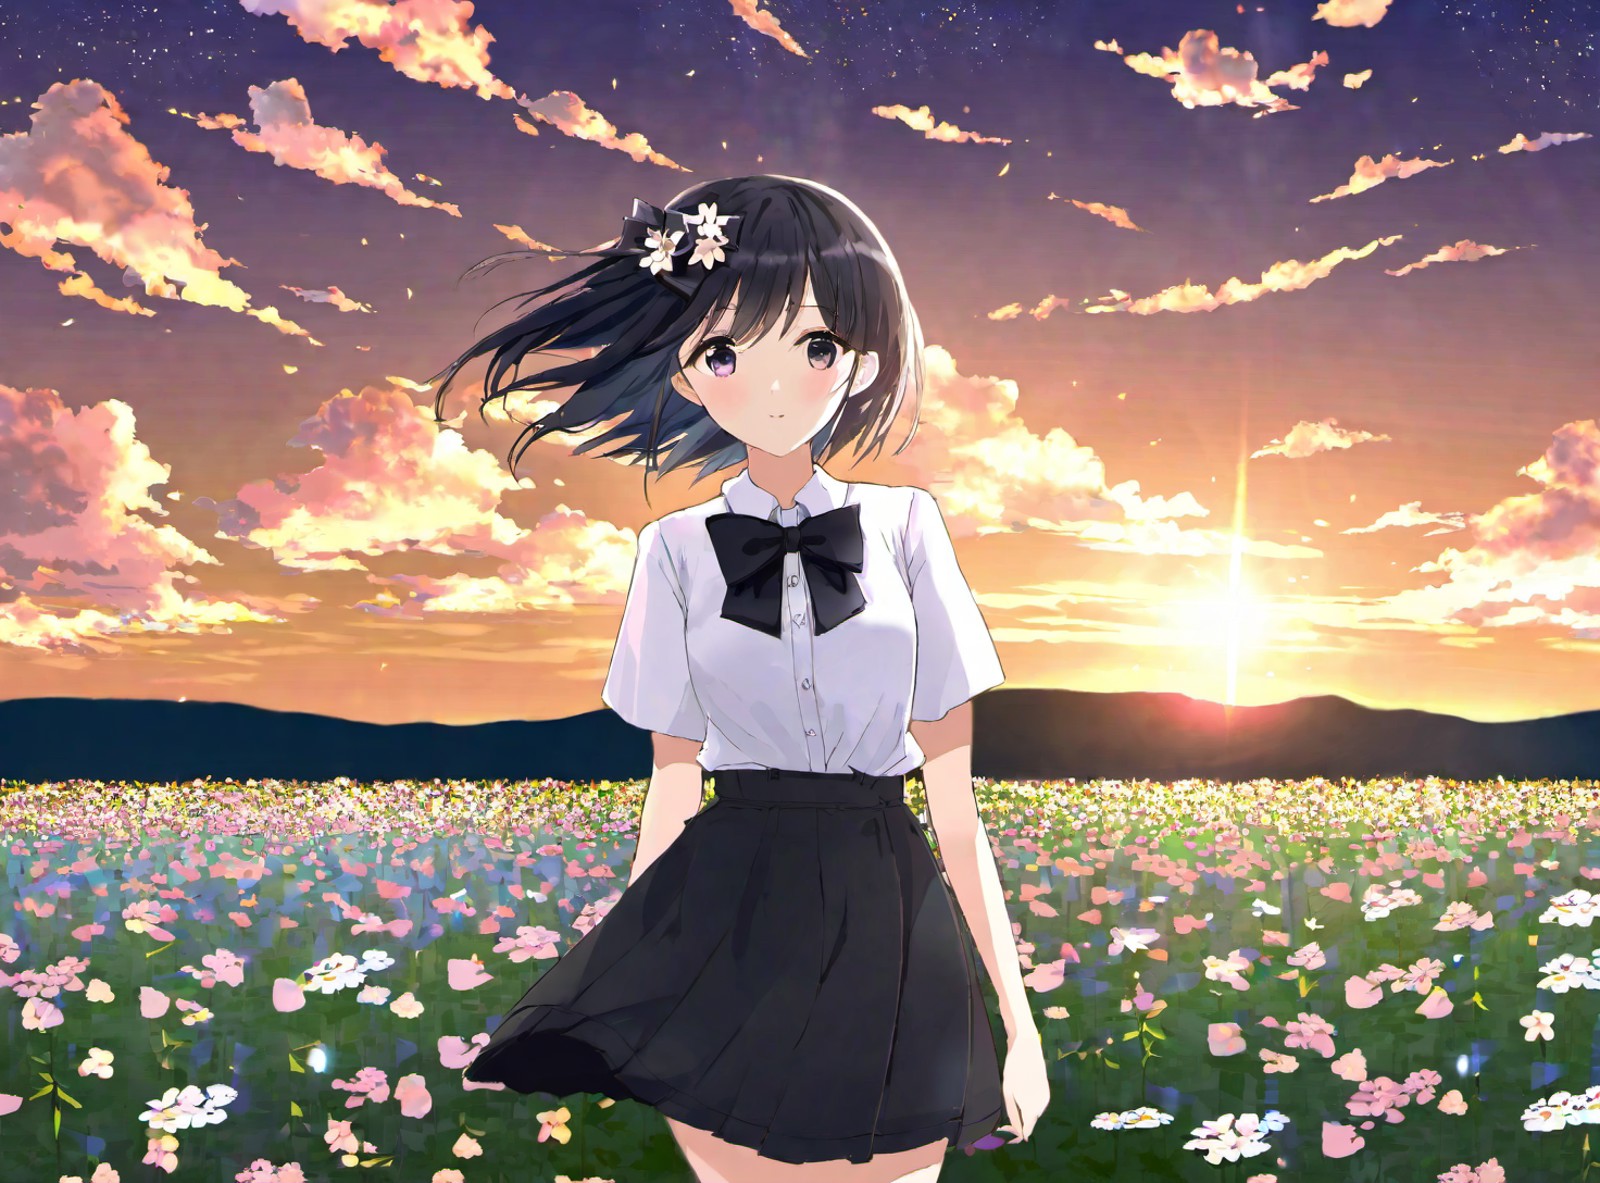 a young woman dressed in a white shirt and a black skirt, standing in a field of flowers. She is wearing a black bow tie a...